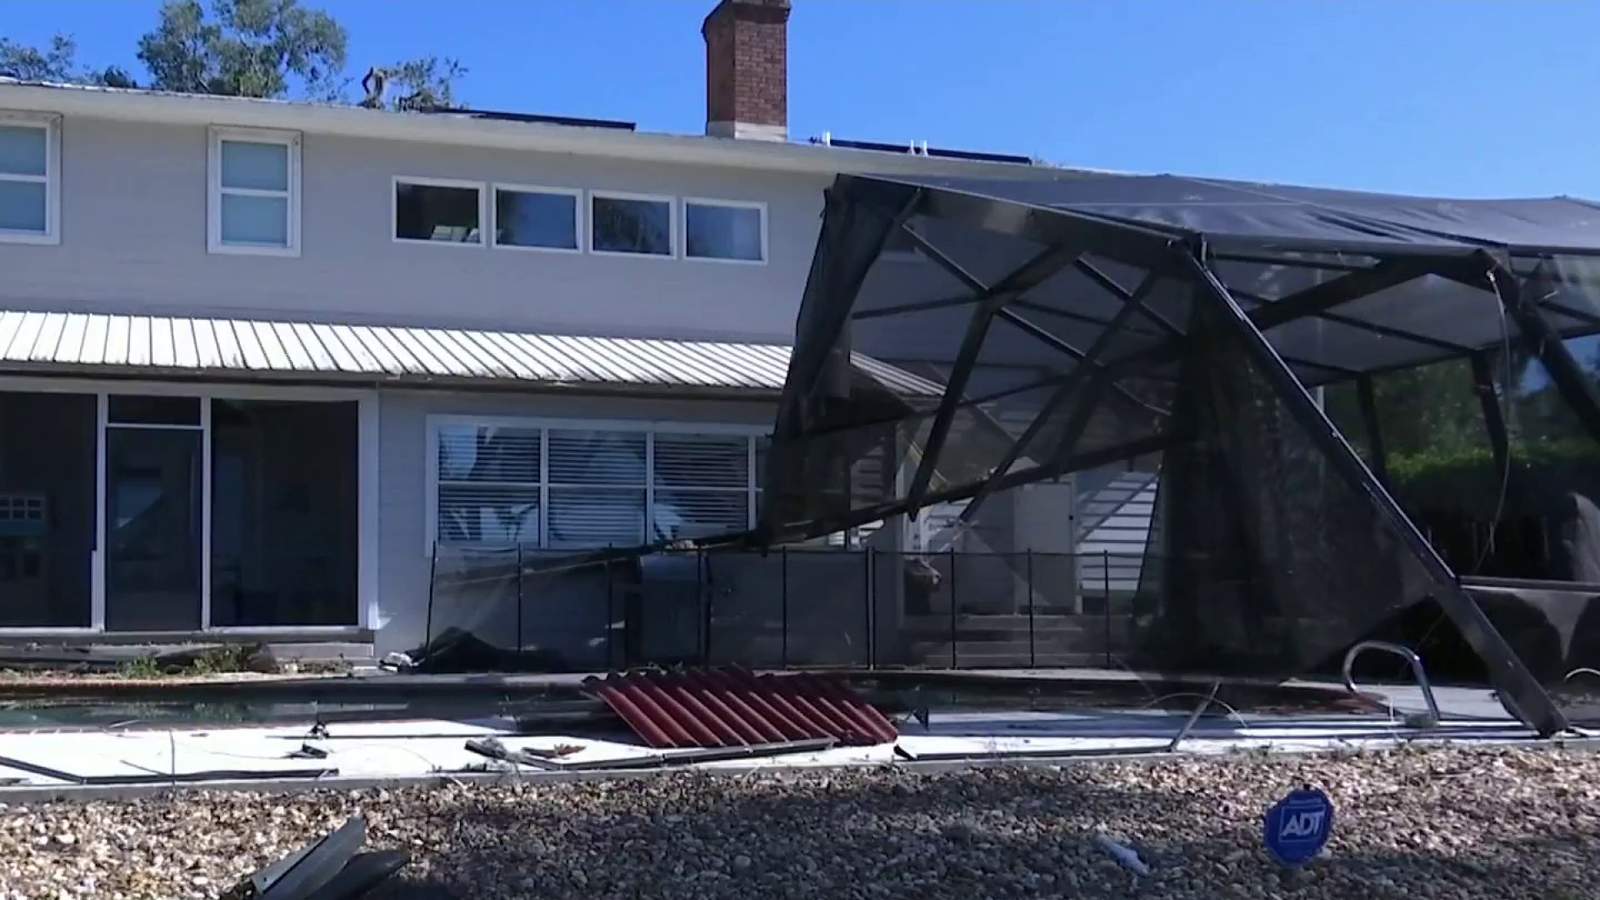 Cleanup underway after EF-1 tornado rips 20-mile path through Flagler County